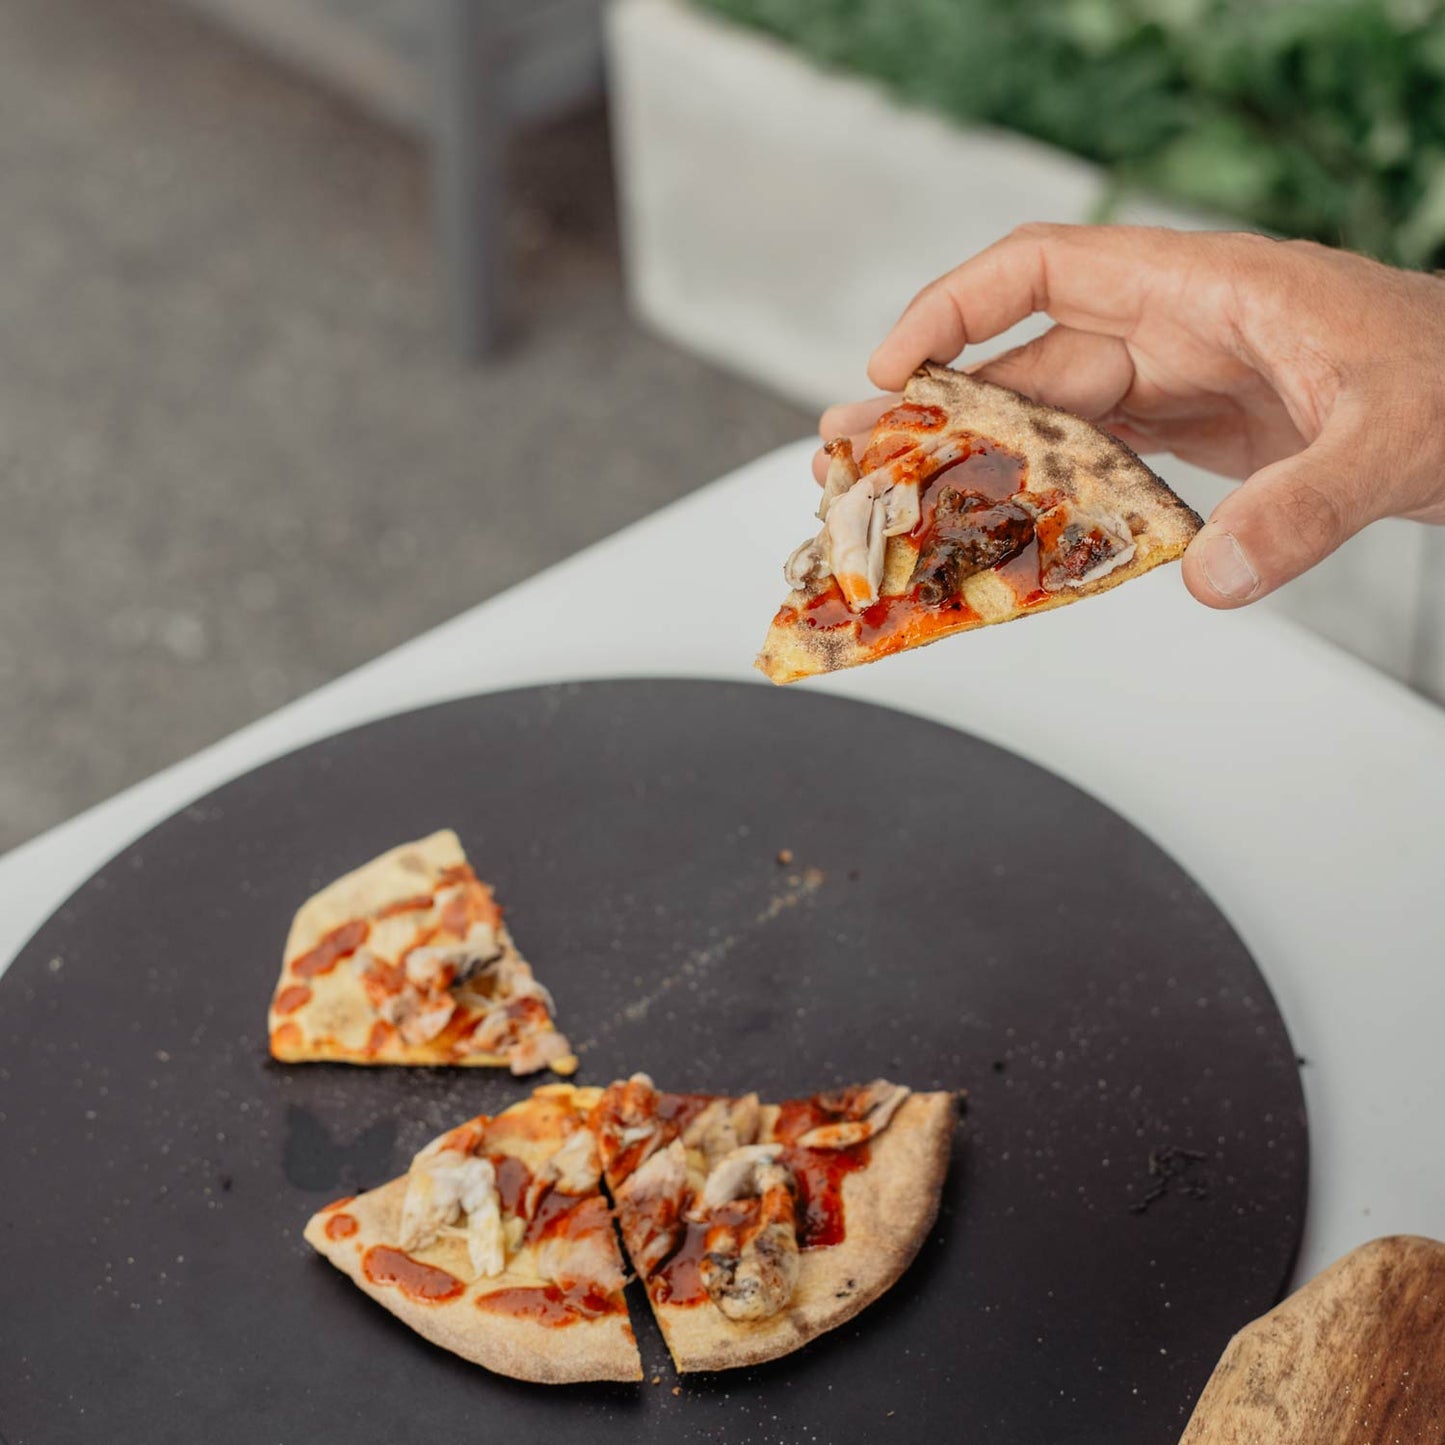 Man picks up a slice of flatbread covered in scotch bonnet hot sauce